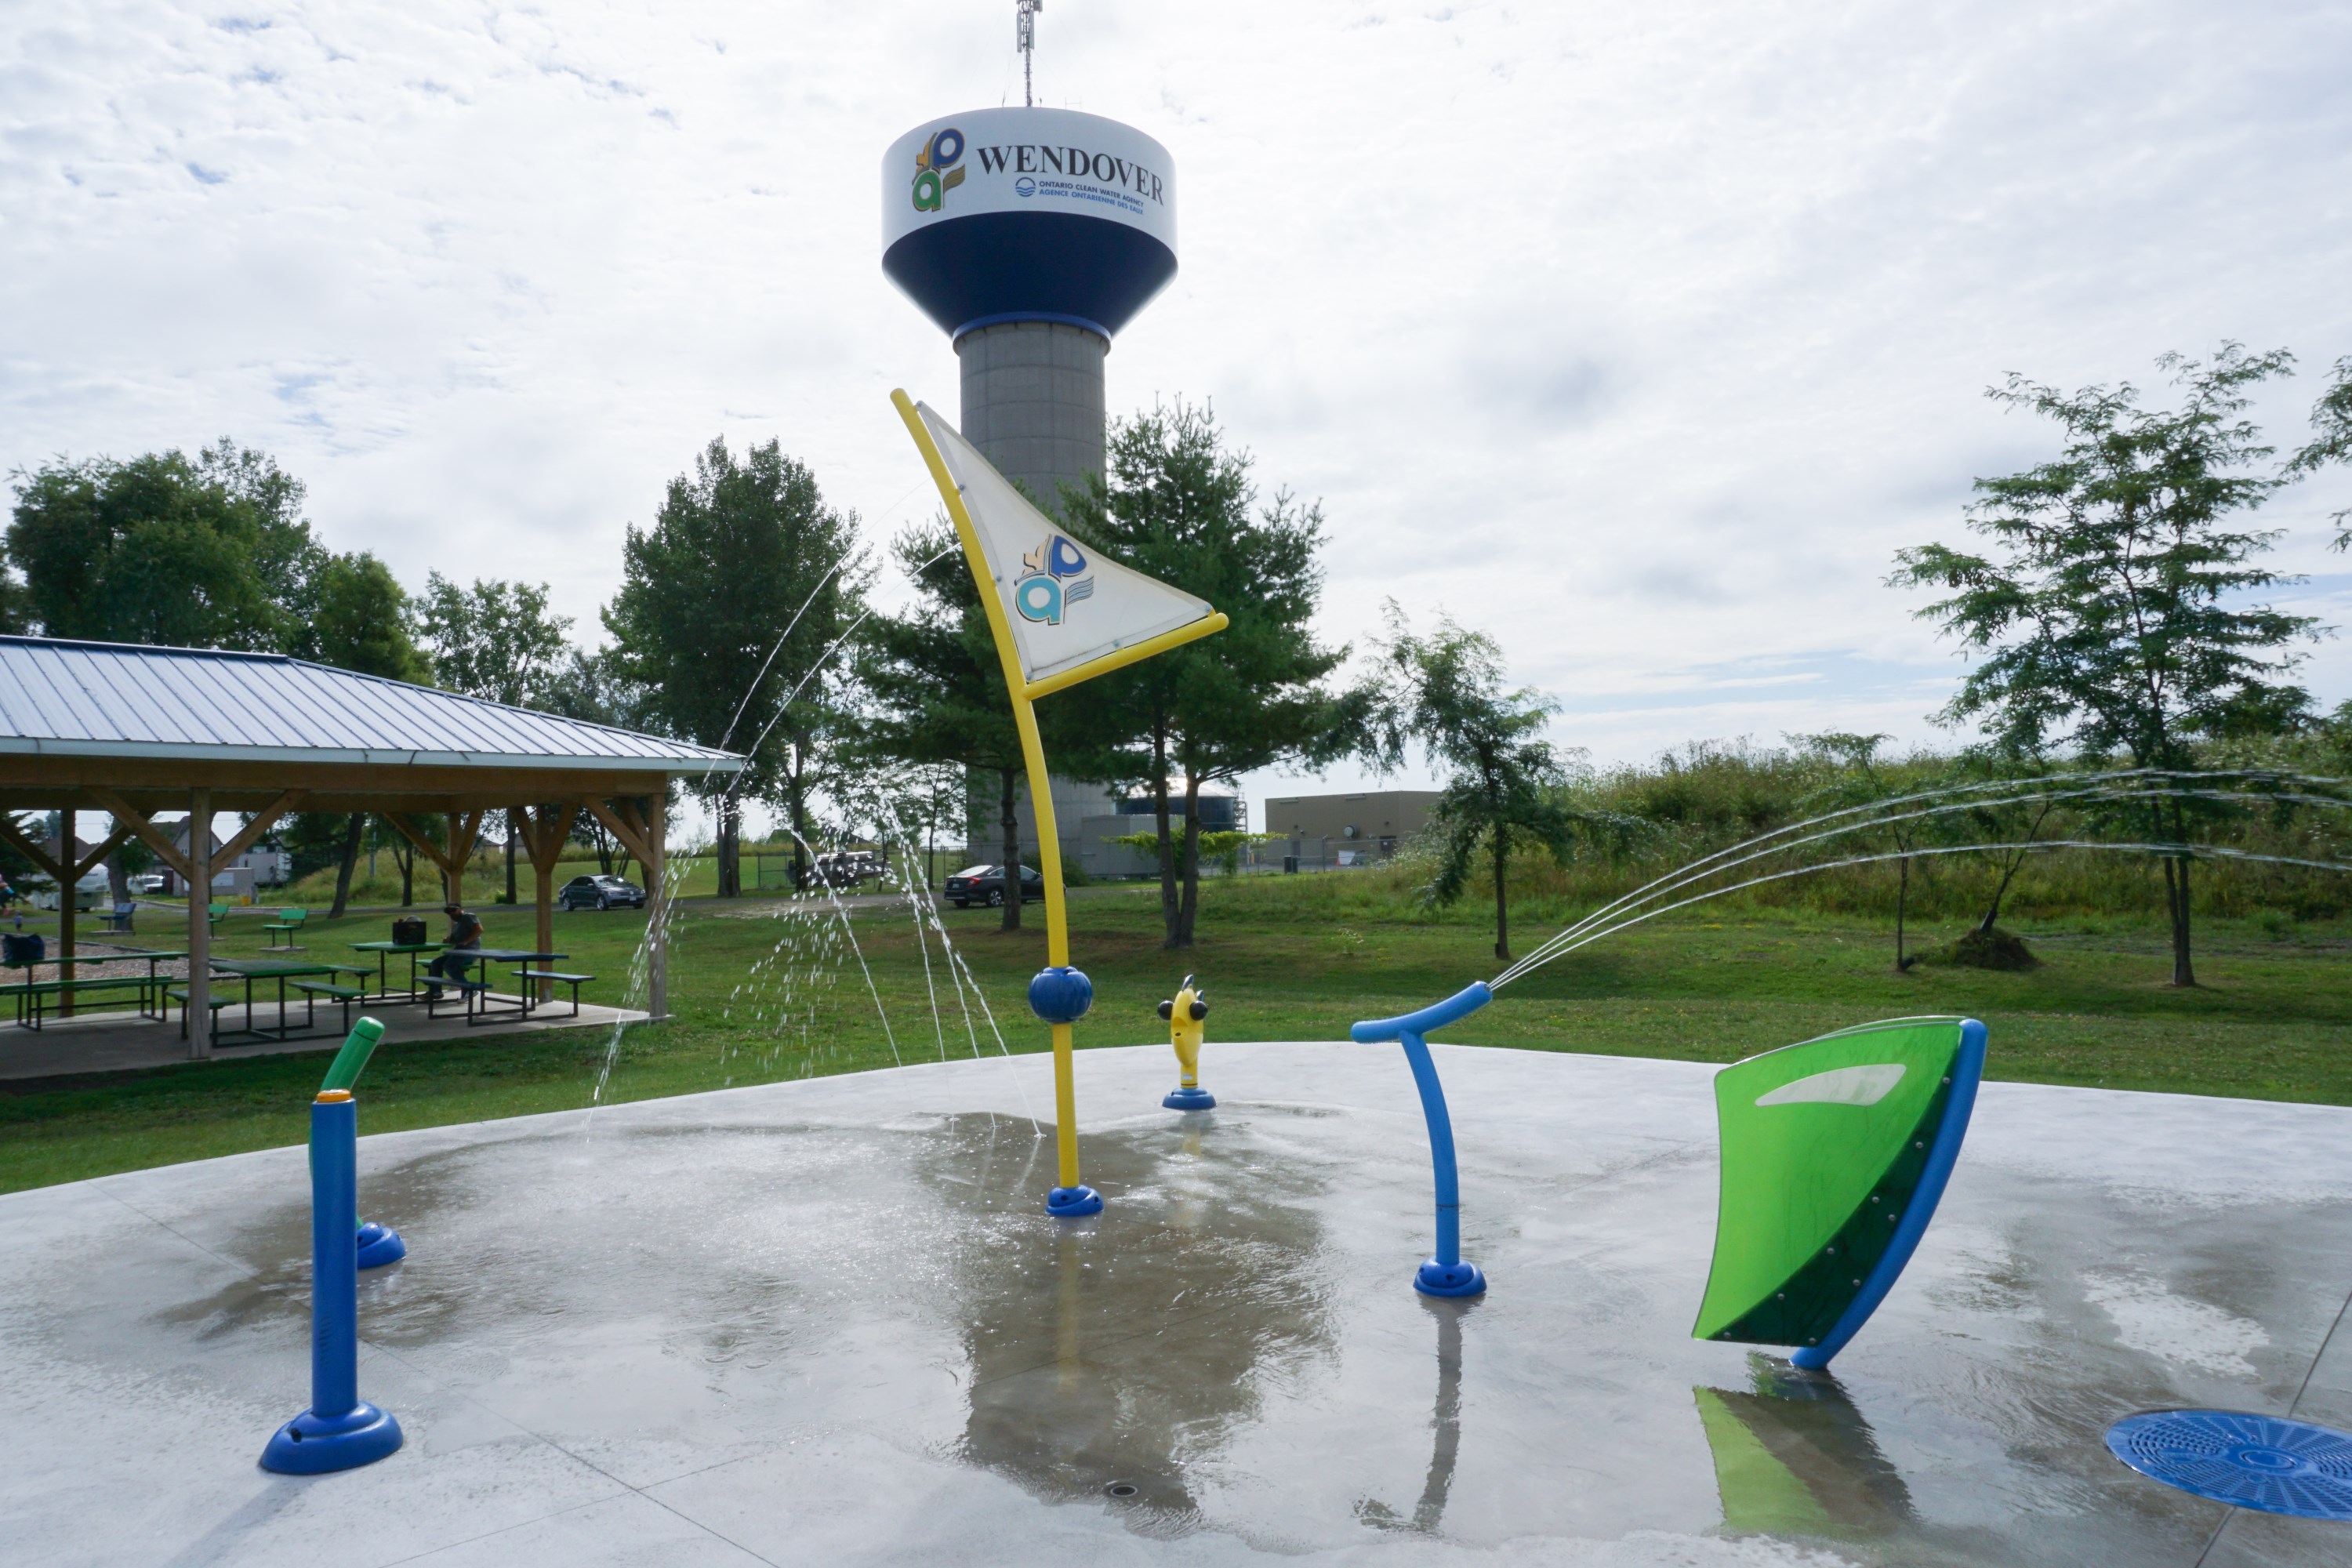 View of the Splashpad at the Denis St-Pierre Park, the water tower and a gazebo